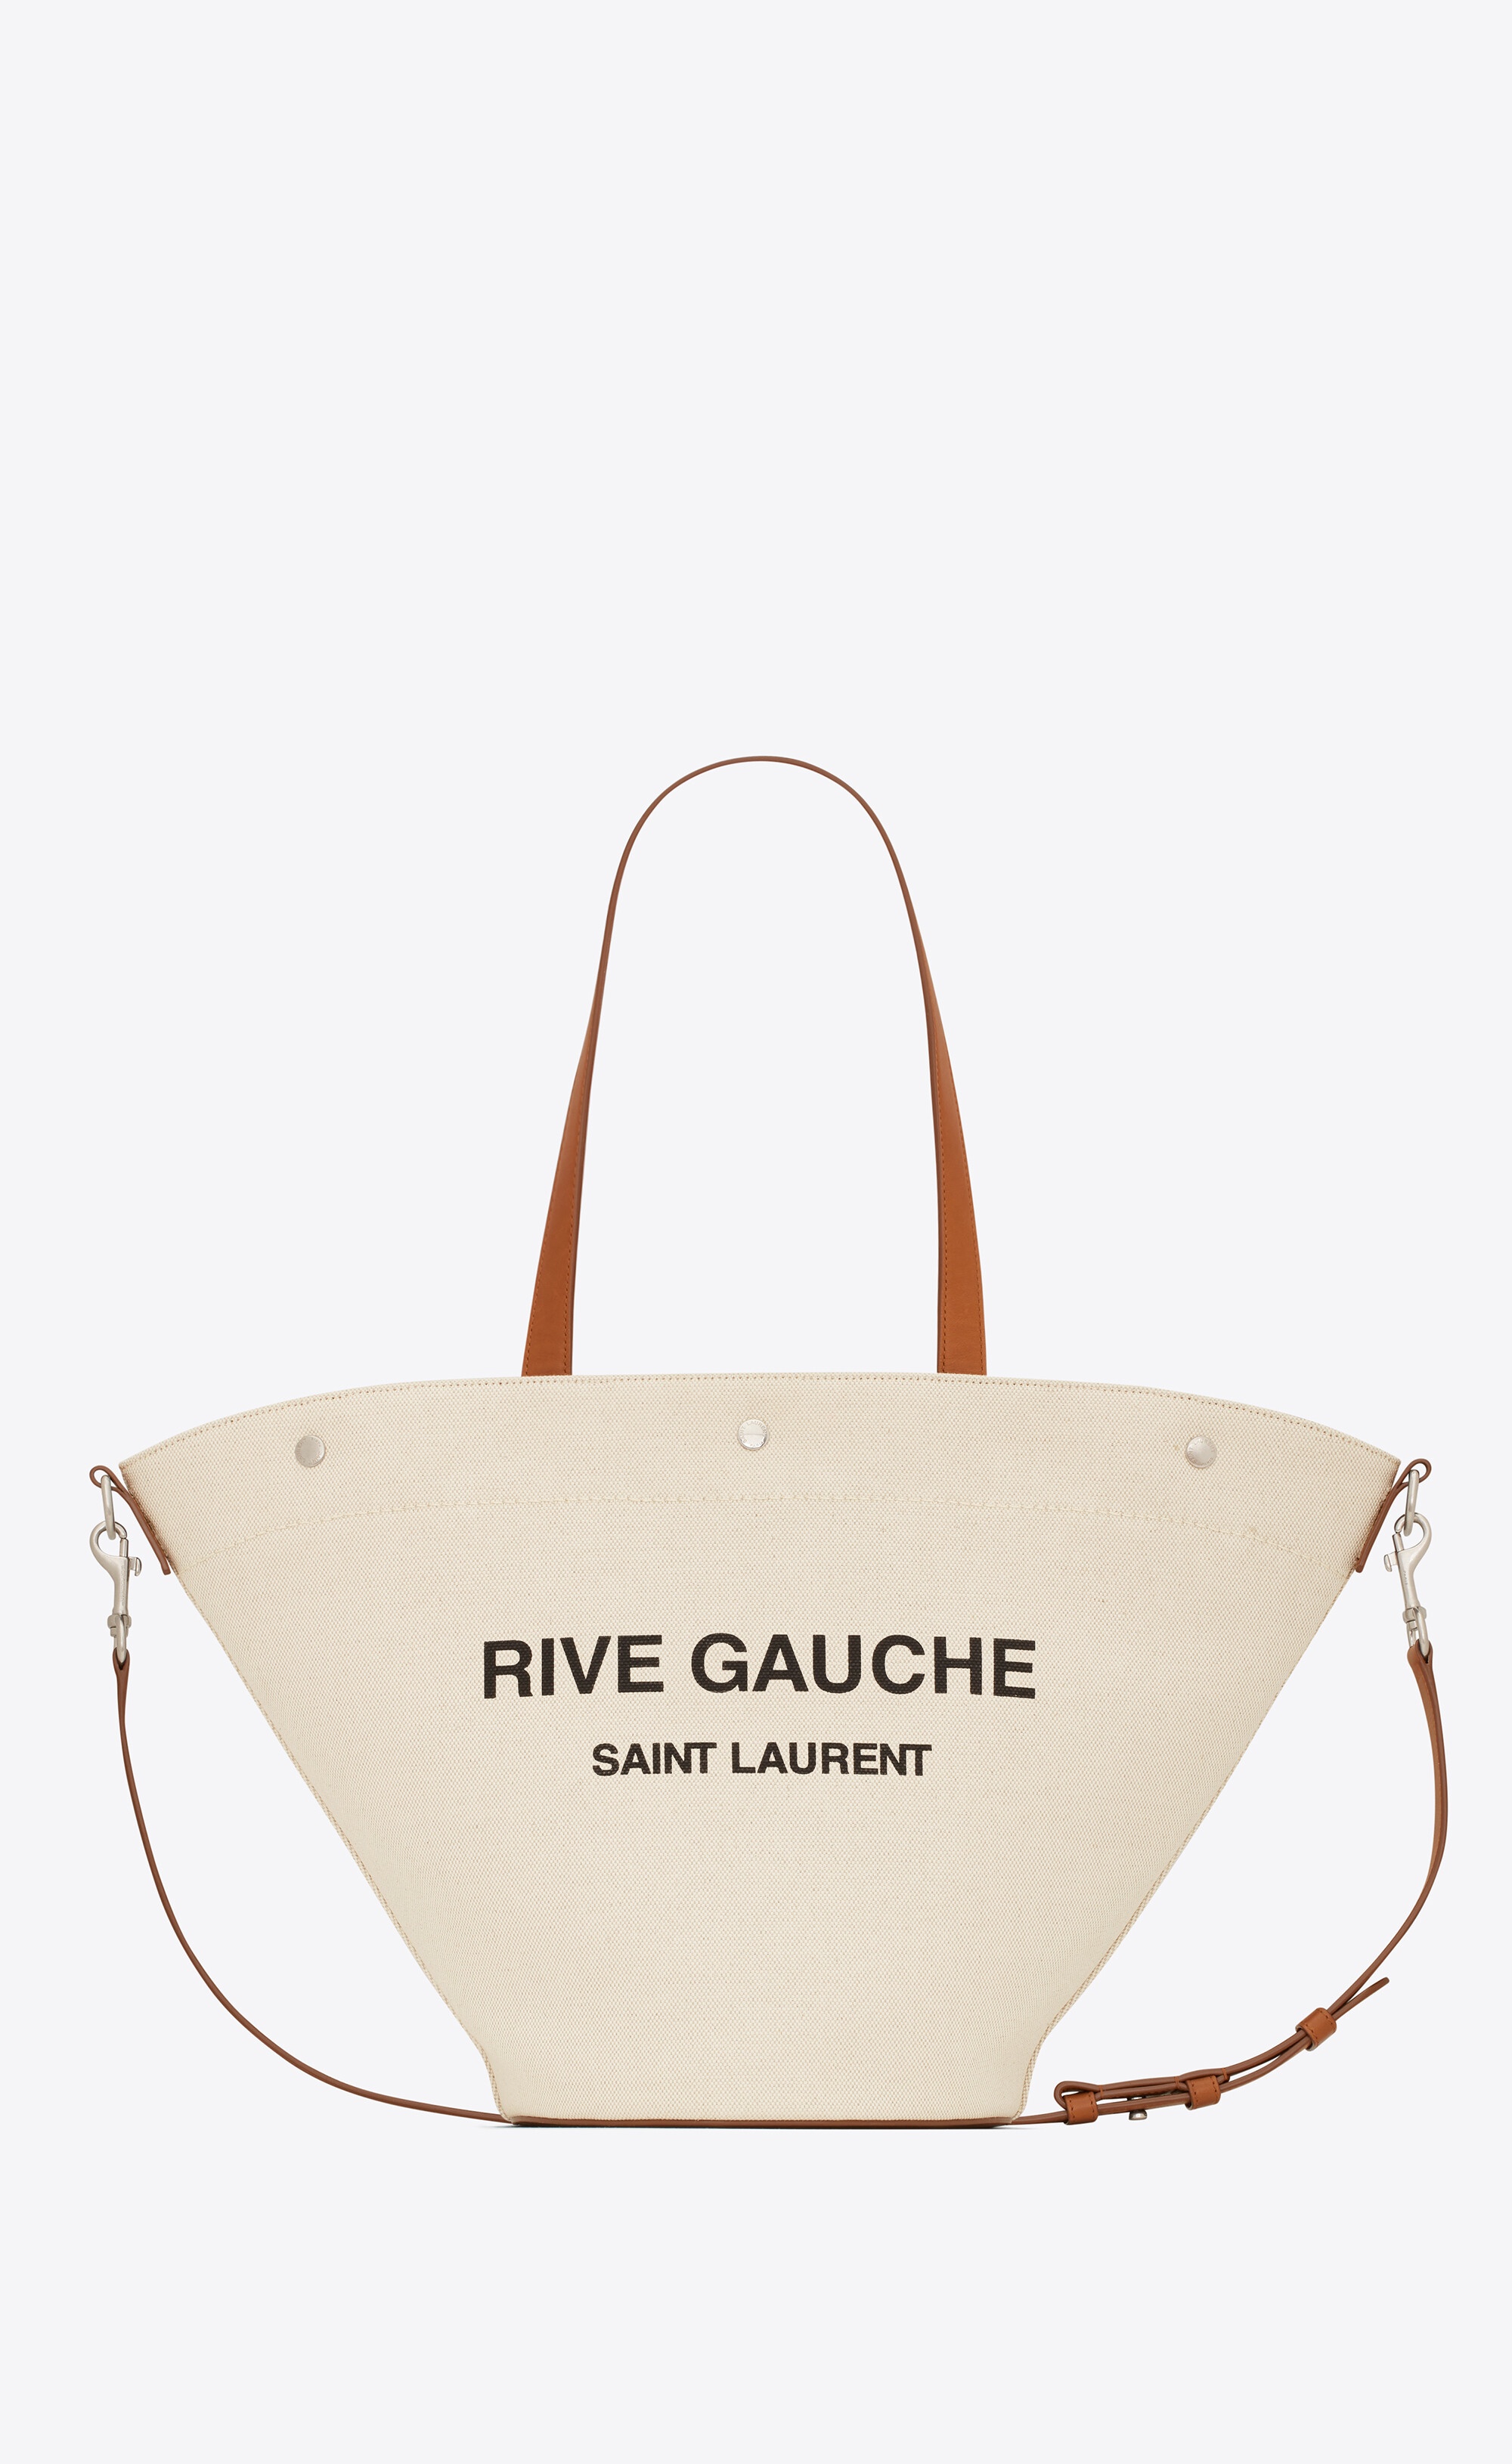 SAINT LAURENT rive gauche tote bag in canvas and vintage leather